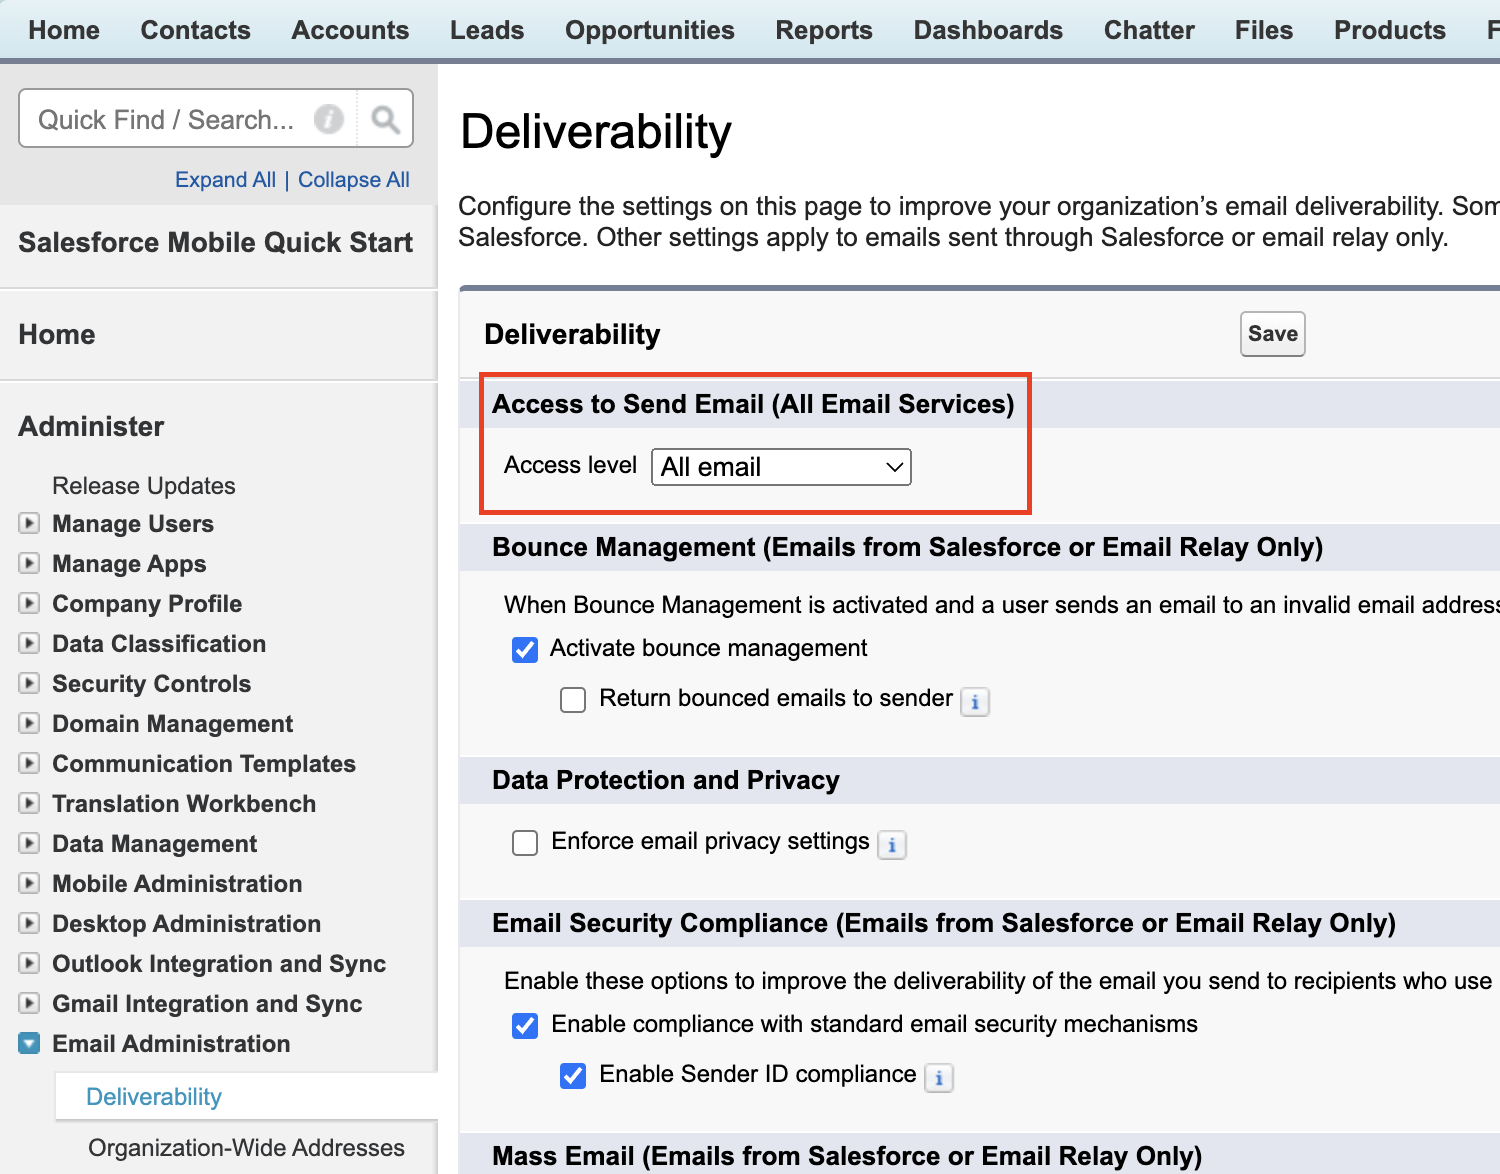 Configuring deliverability in Salesforce Classic